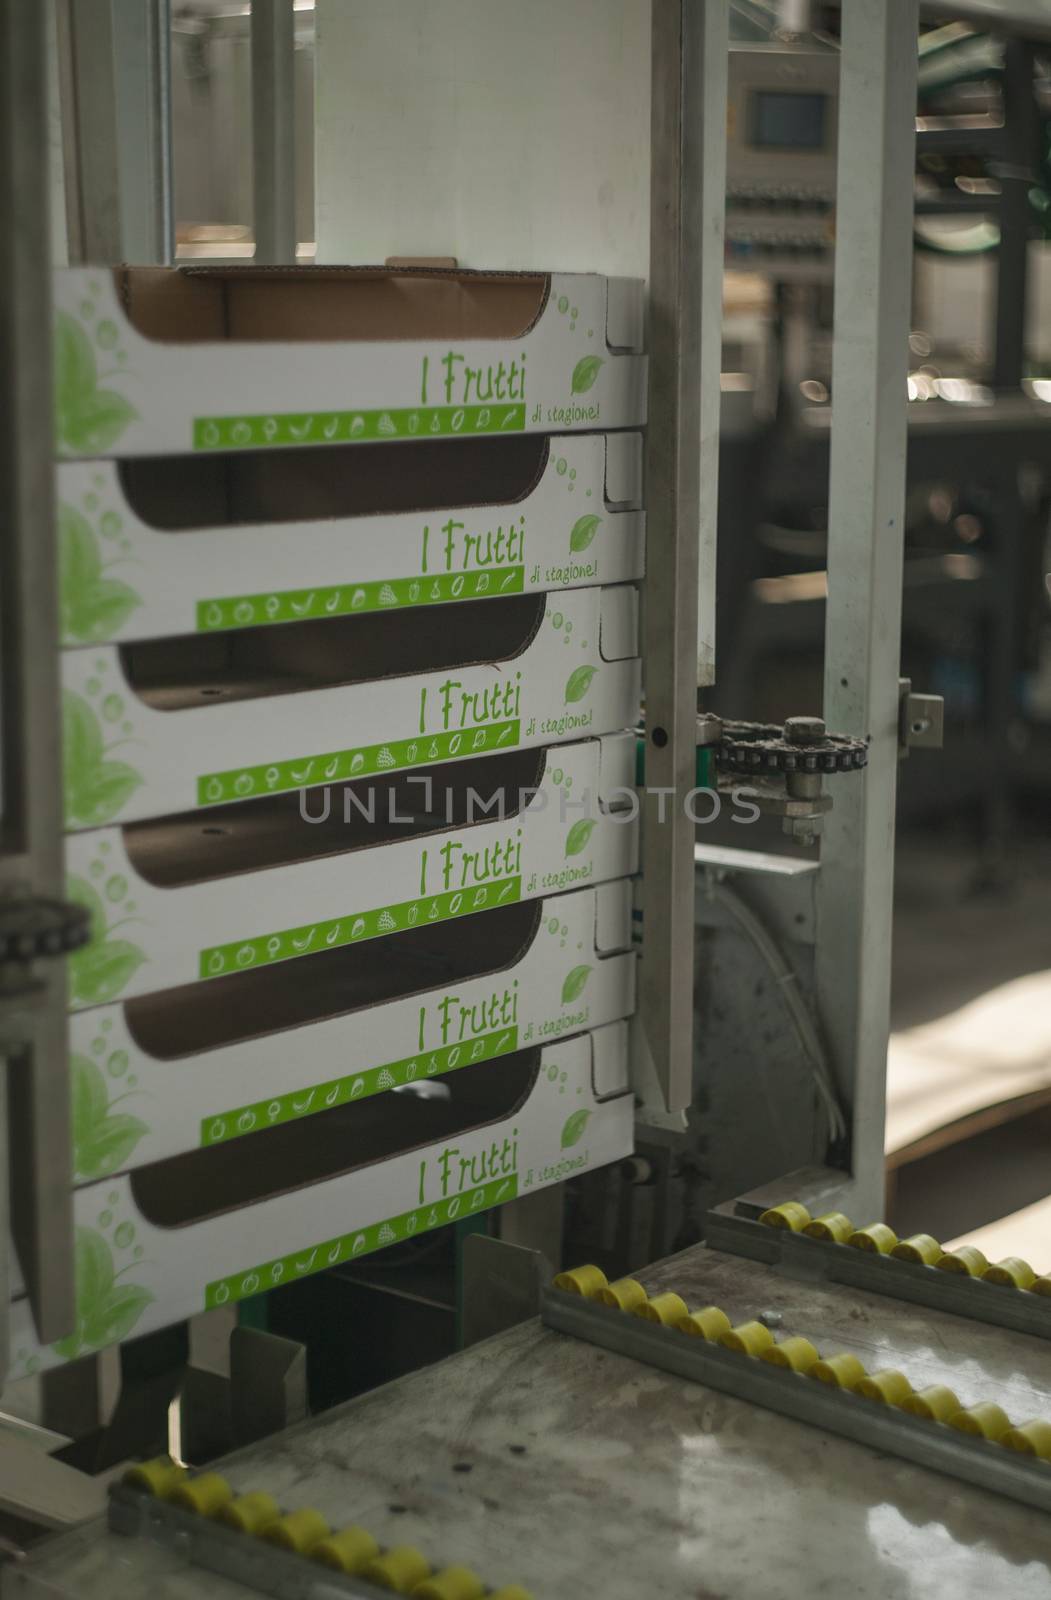 LUSIA, ITALY 24 MARCH 2020: Machinery packaging factory